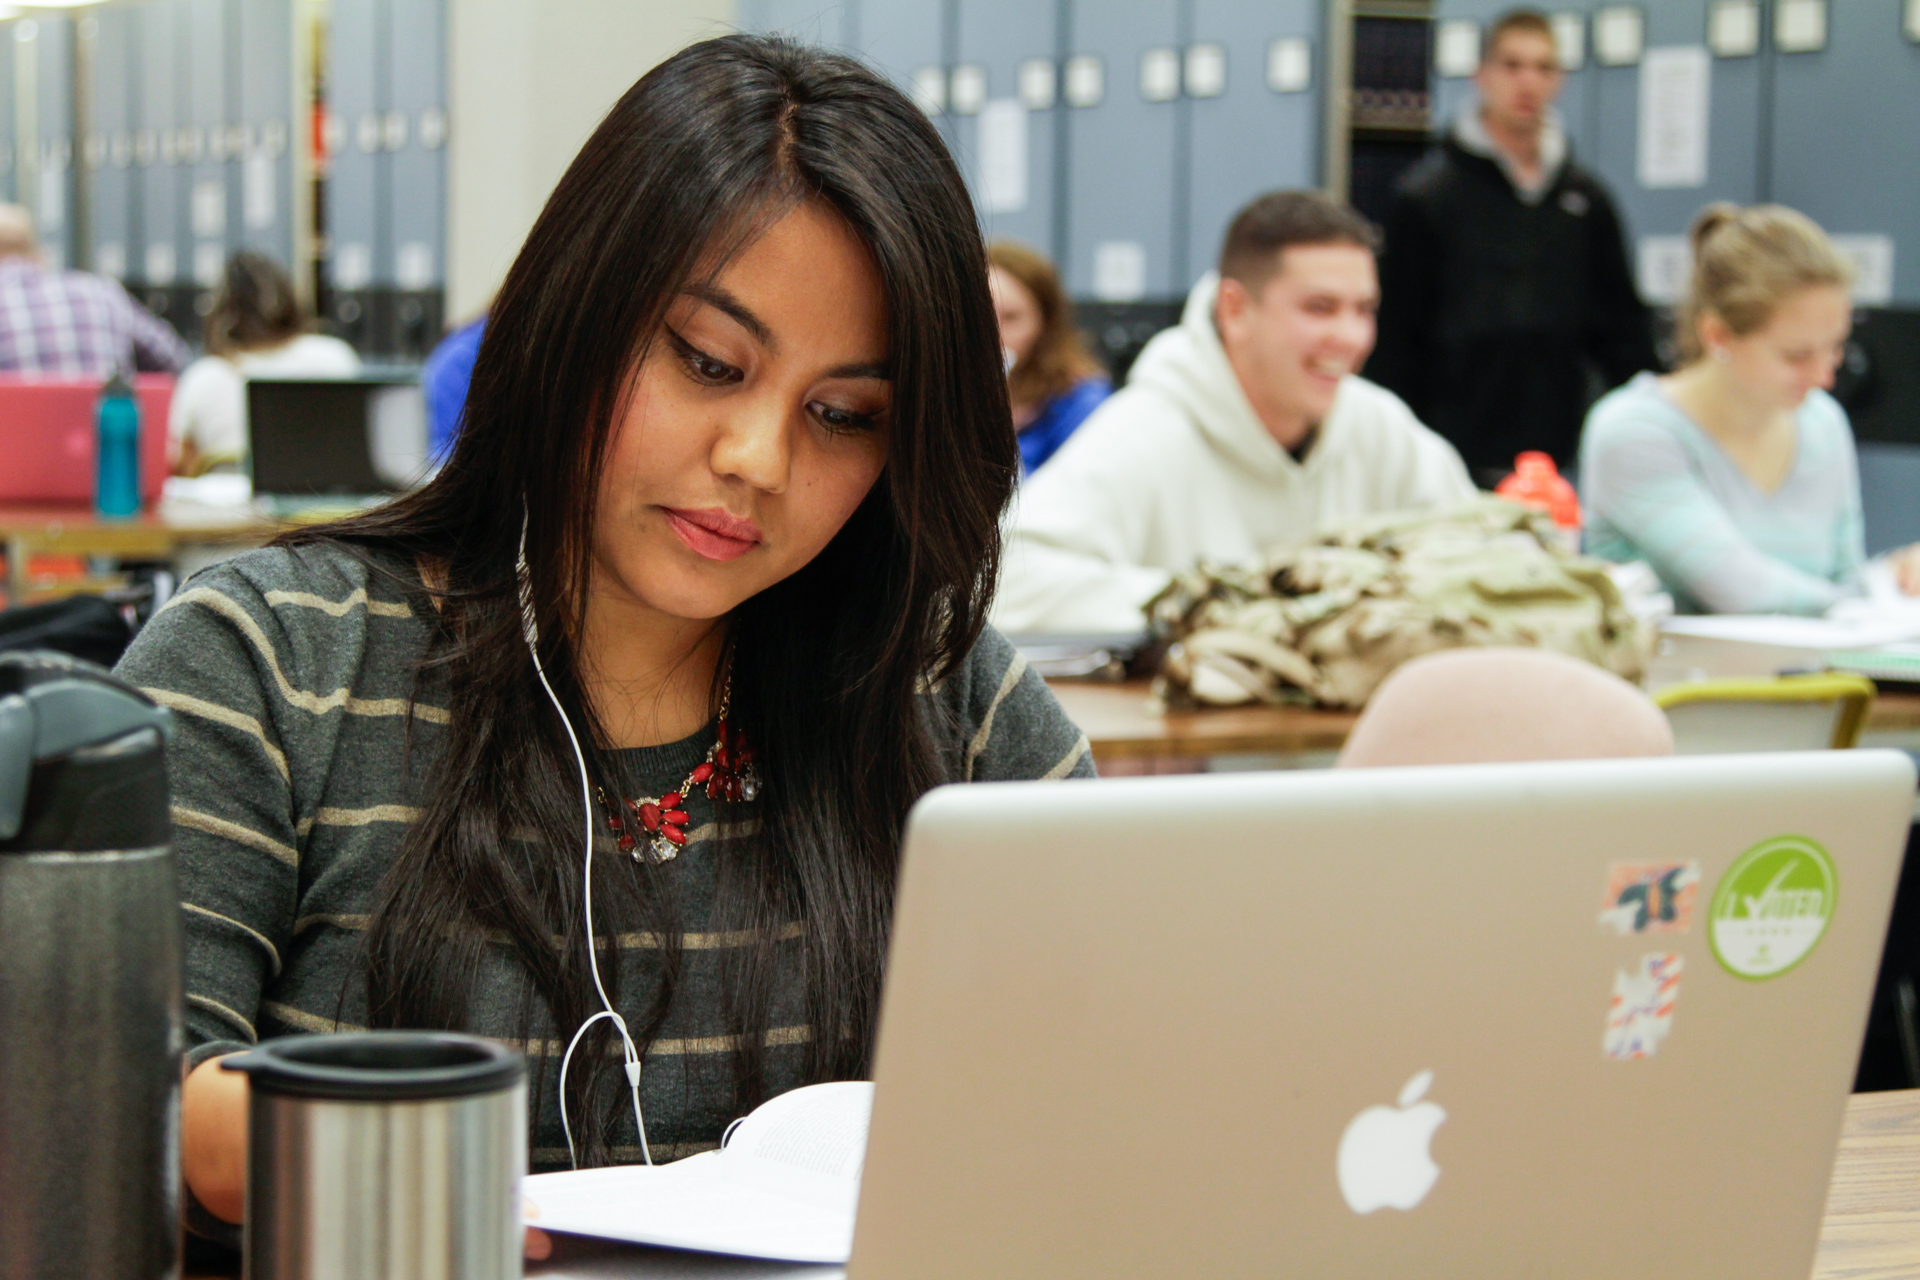 A student works on a laptop in the University Library.